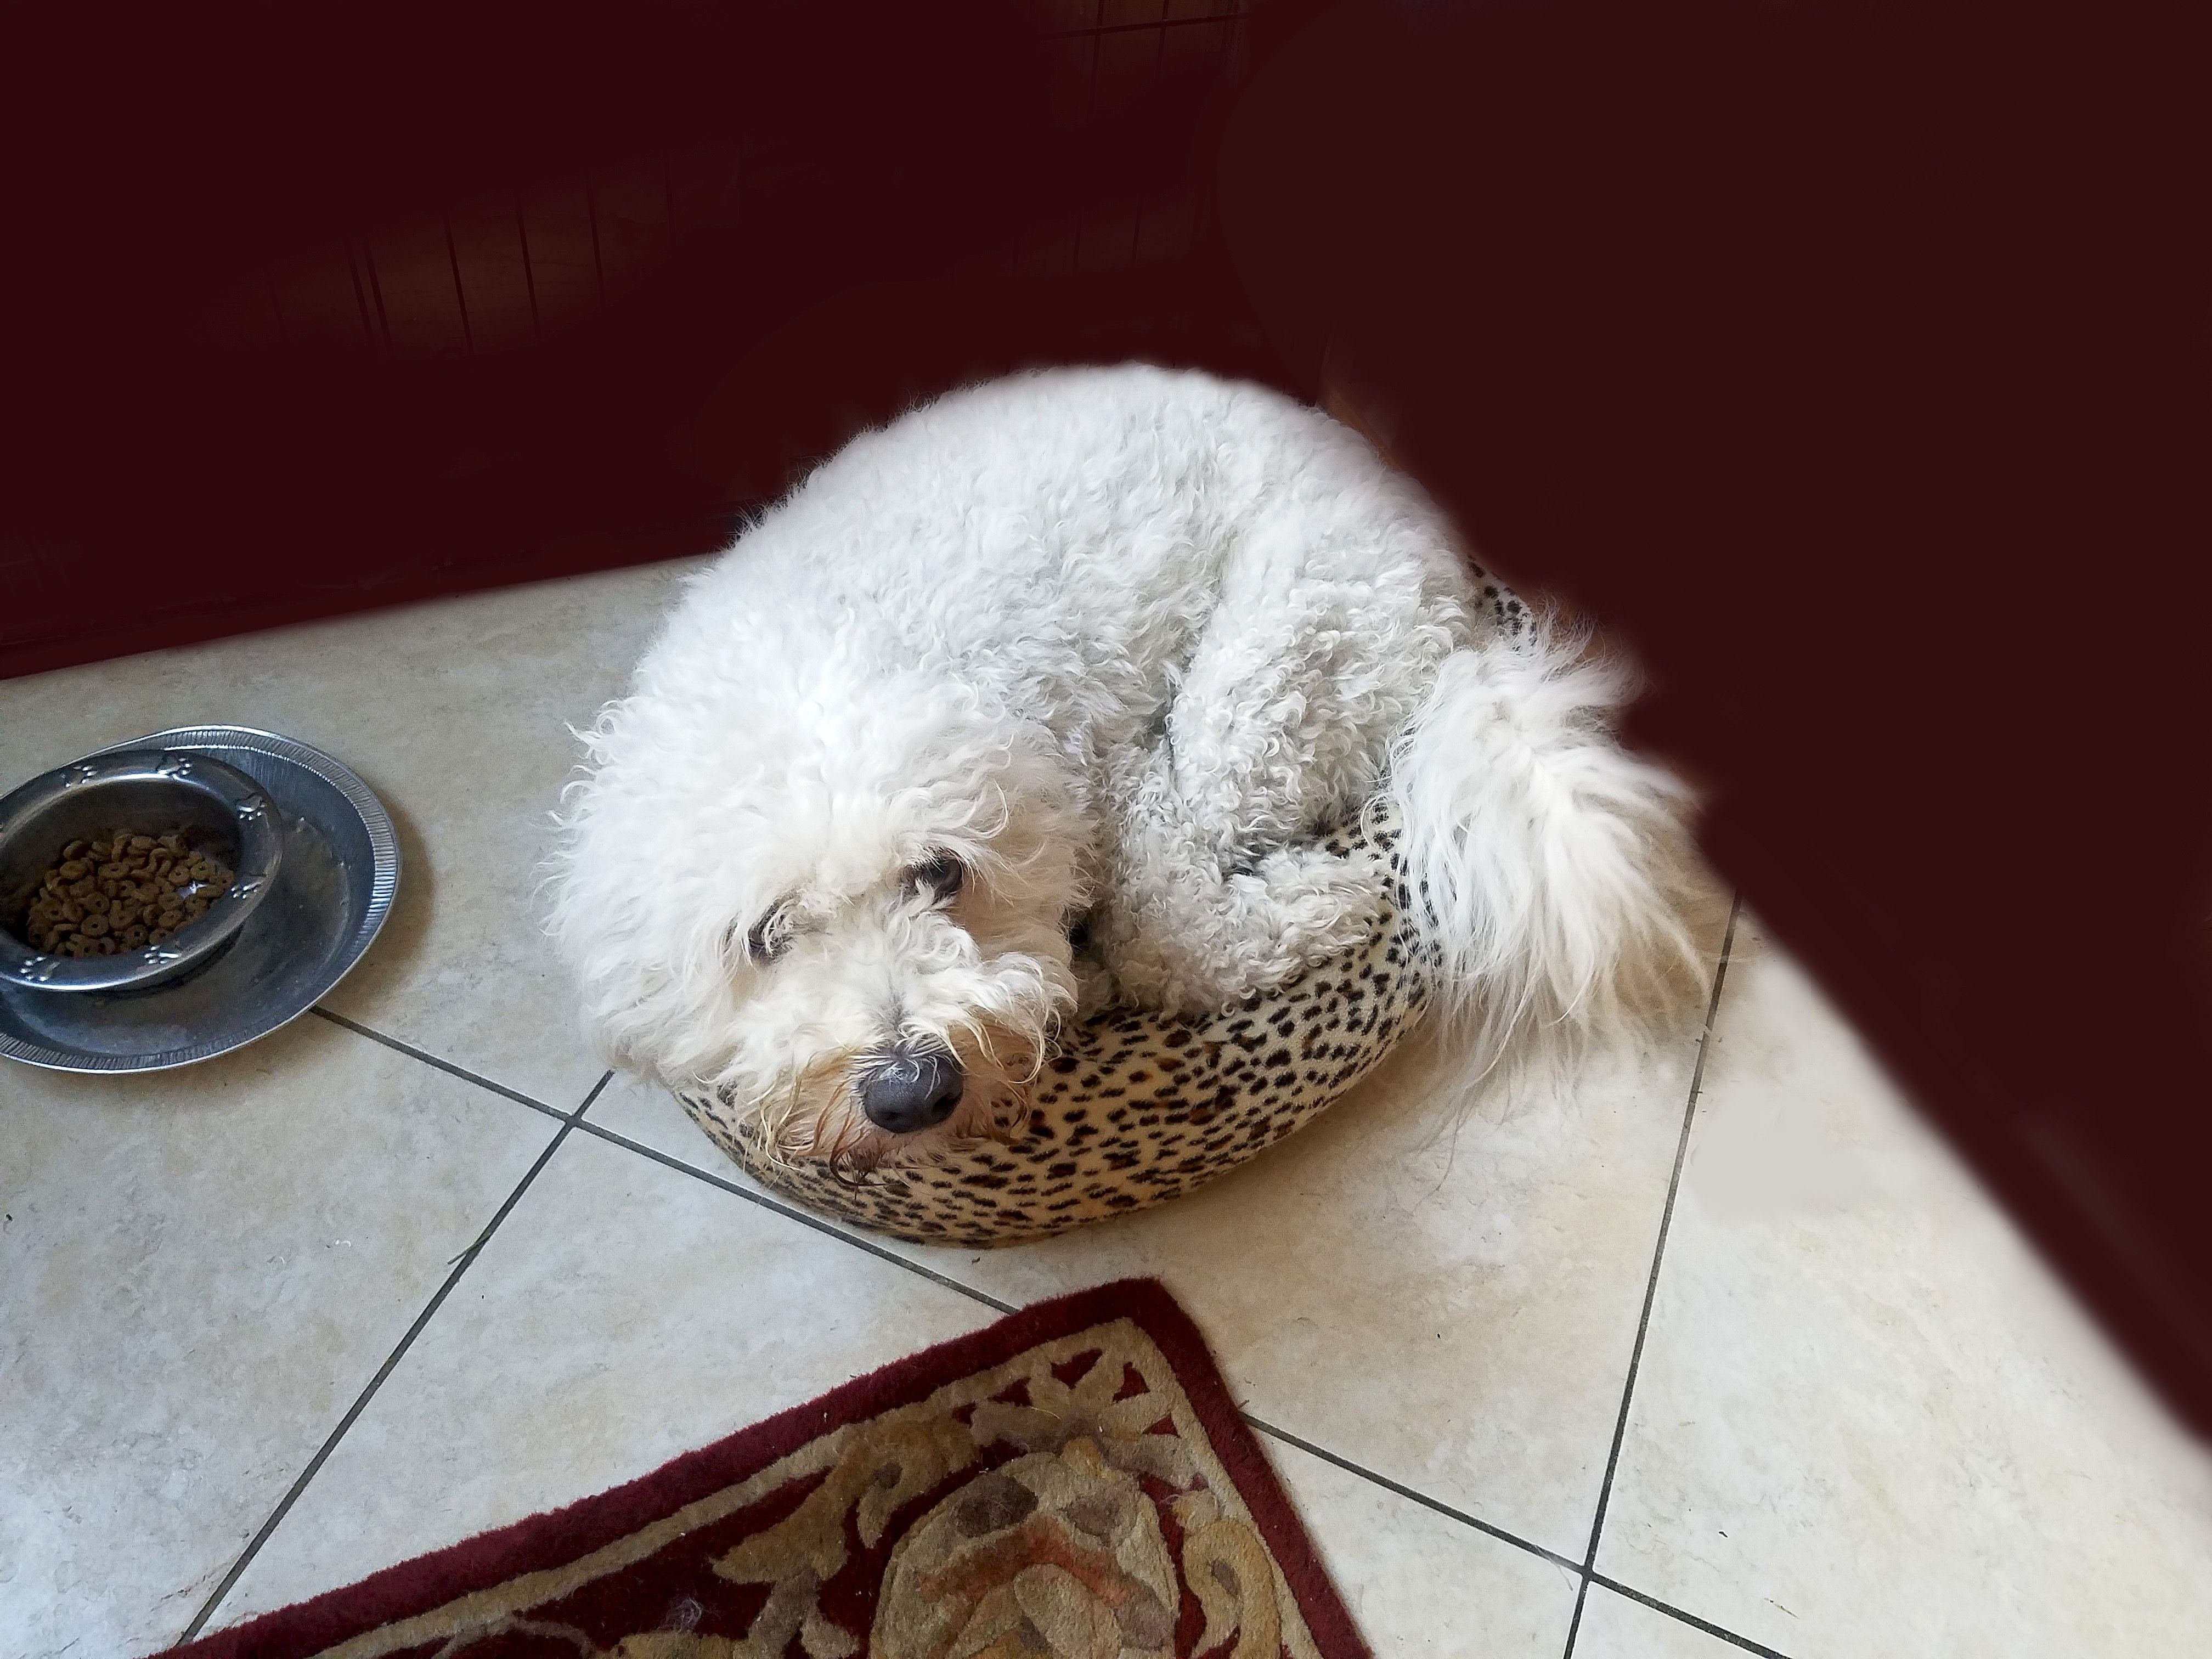 A big dog has squeezed himself into a tiny dog's bed.